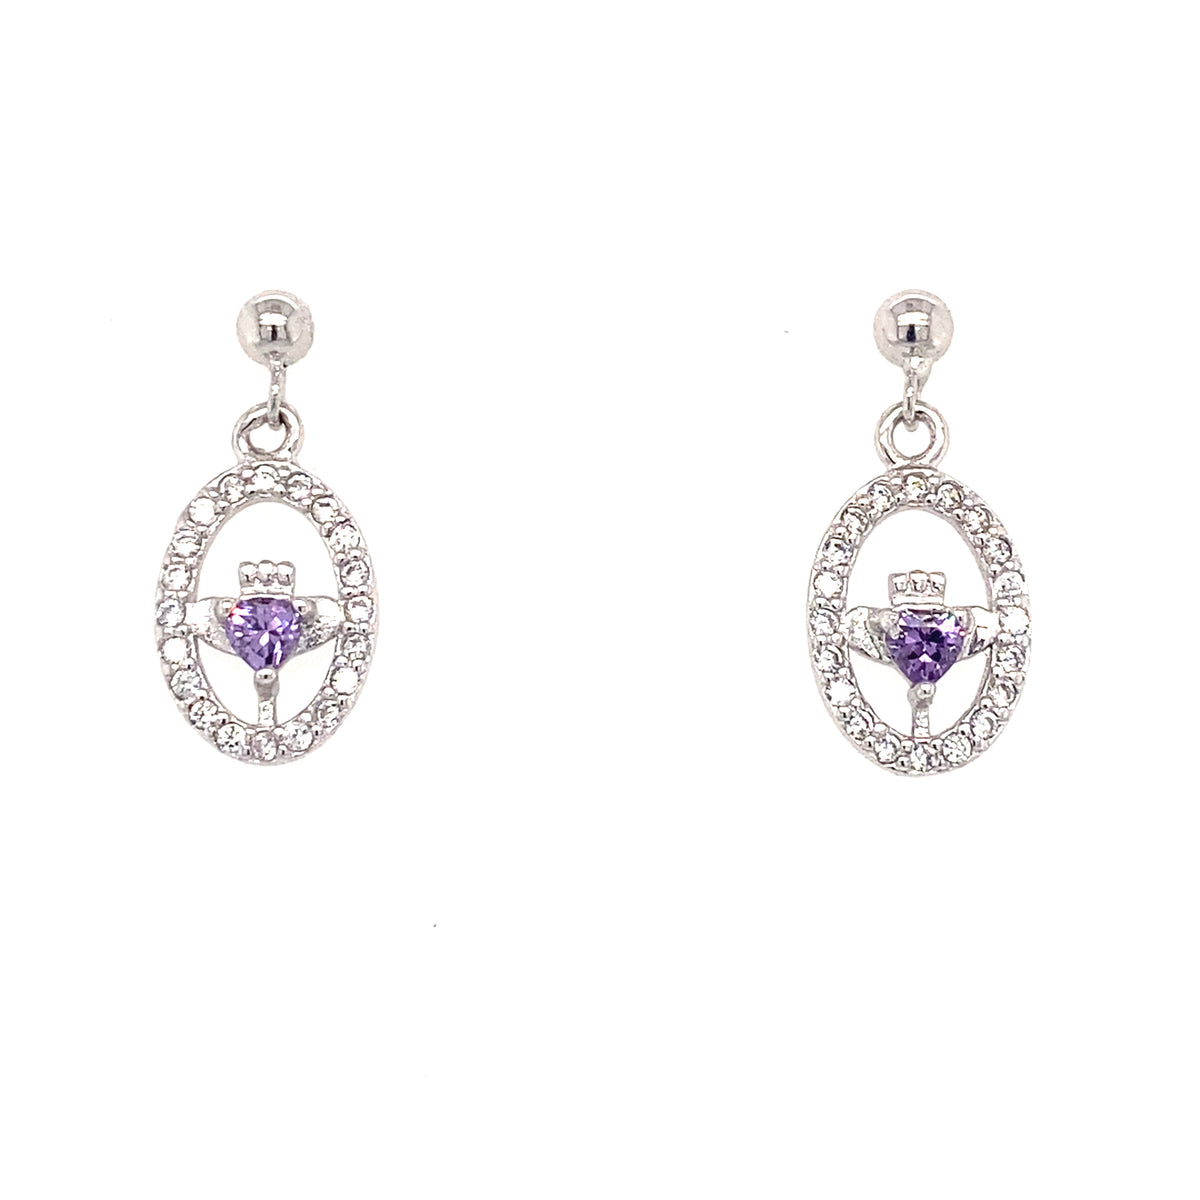 Sterling Silver Stone set Claddagh Earrings with a purple stone